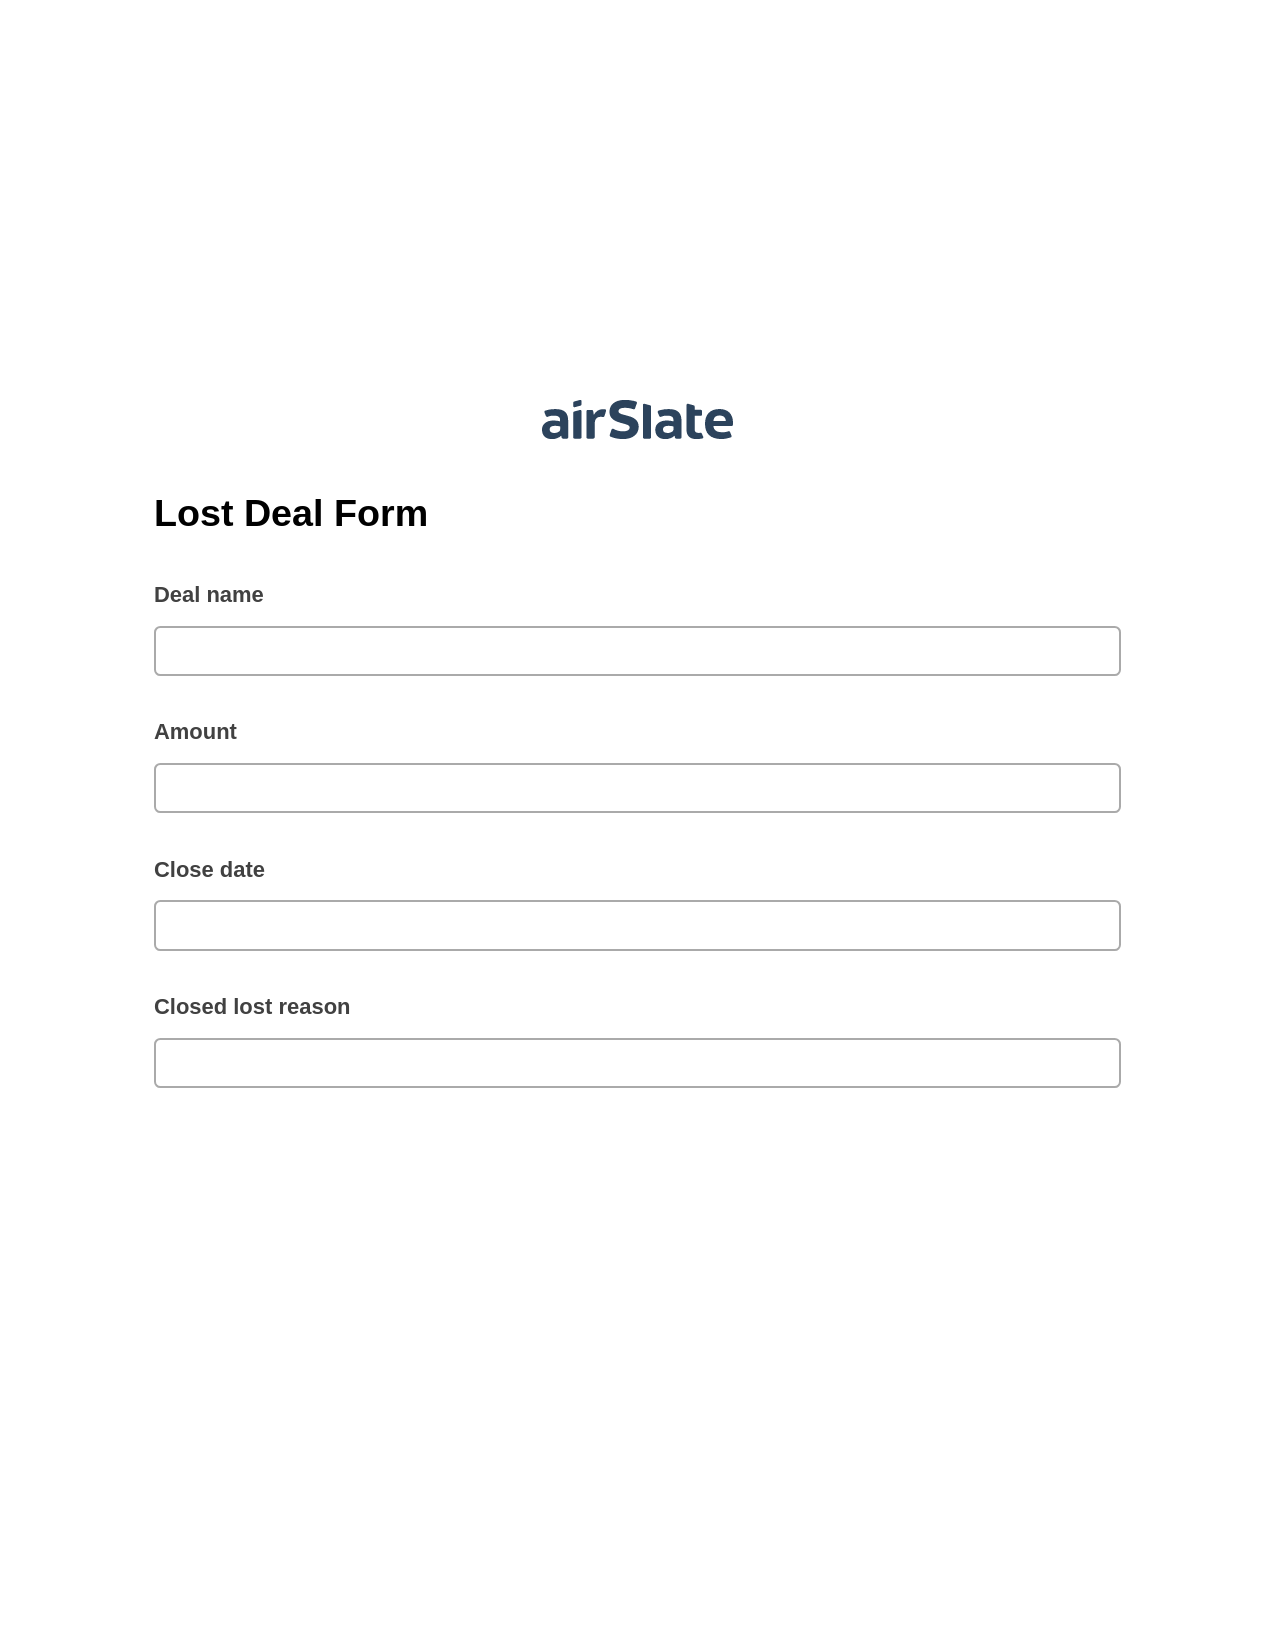 Lost Deal Form Pre-fill Document Bot, Webhook Bot, Post-finish Document Bot